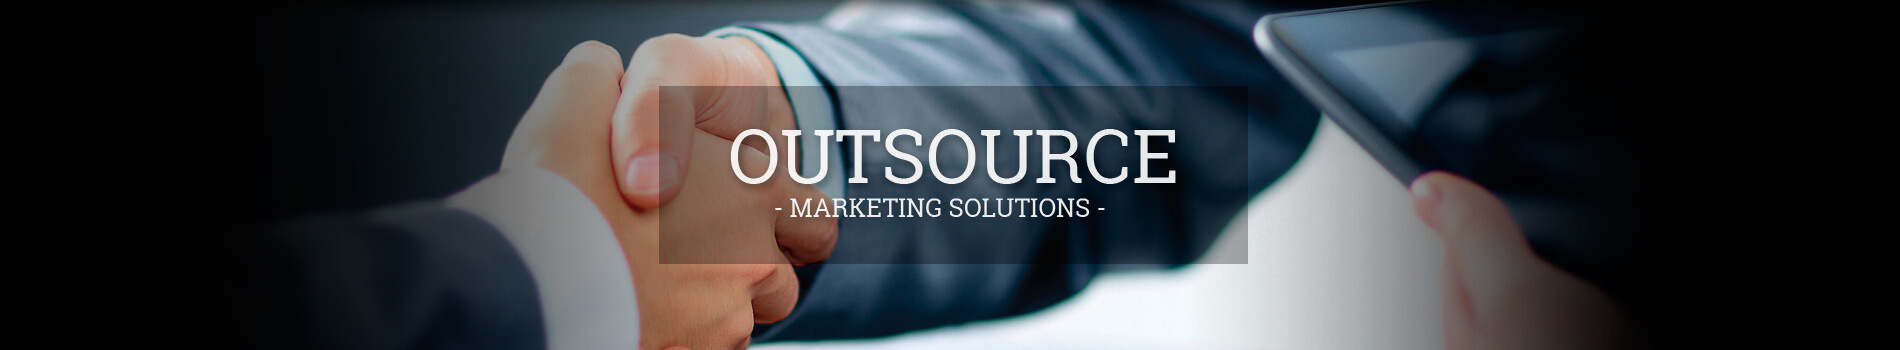 , Outsource Marketing Solutions, Anchor Biz IT